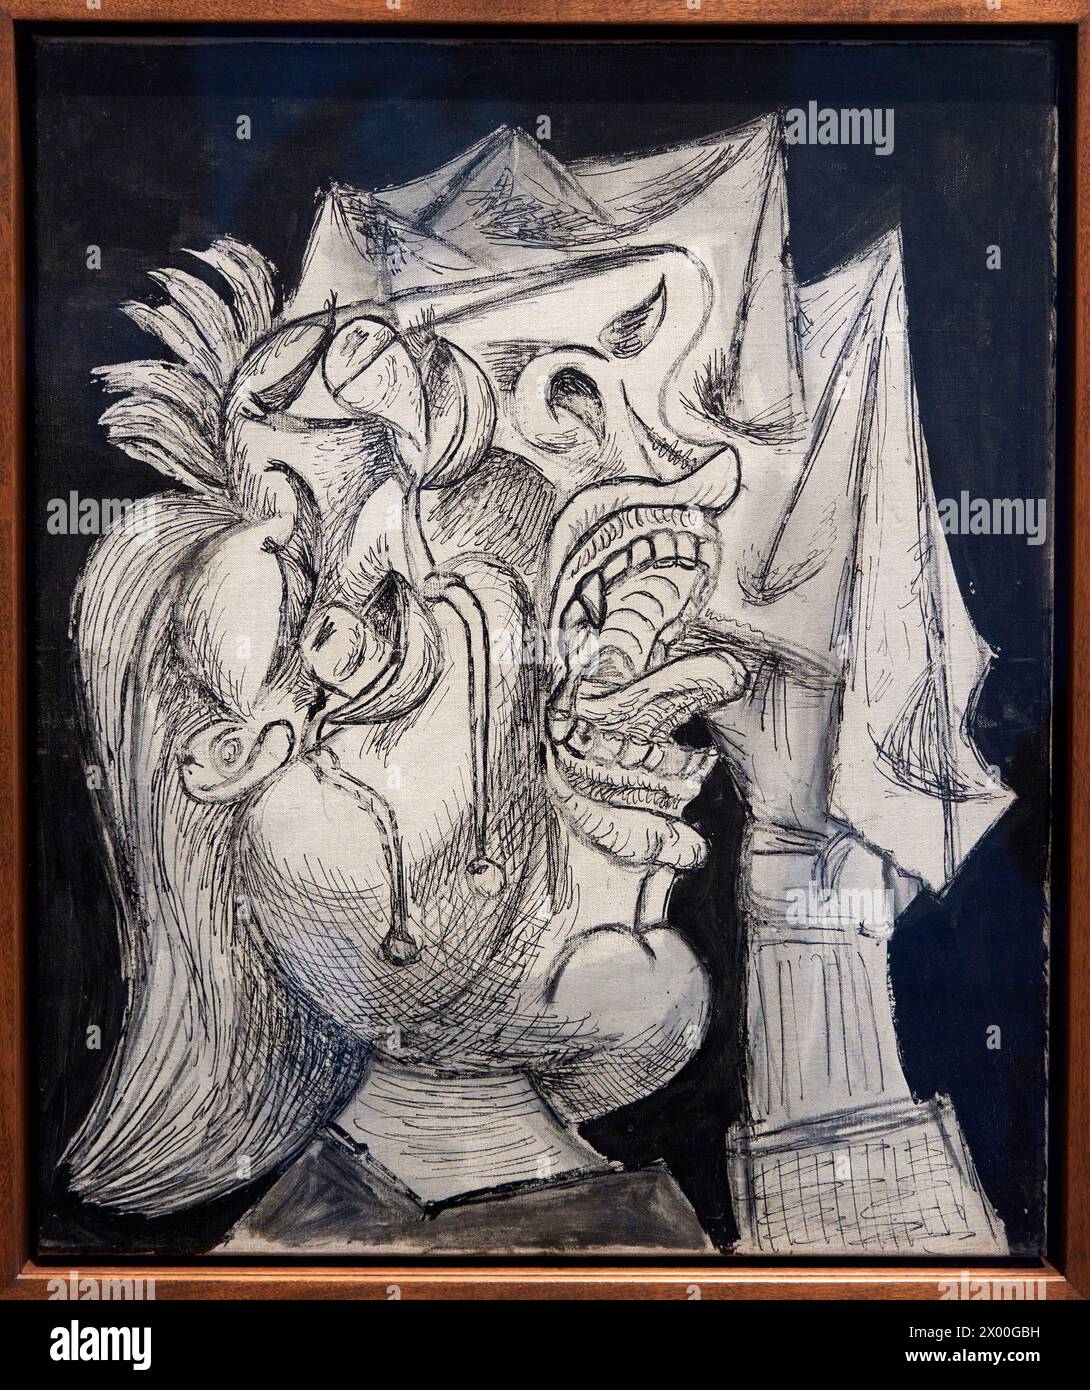 Weeping Woman's Head with. Handkerchief, Postcript for 'Guernica'. 1937, Pablo Picasso, Reina Sofia Museum, Madrid, Spain, Europe. Stock Photo